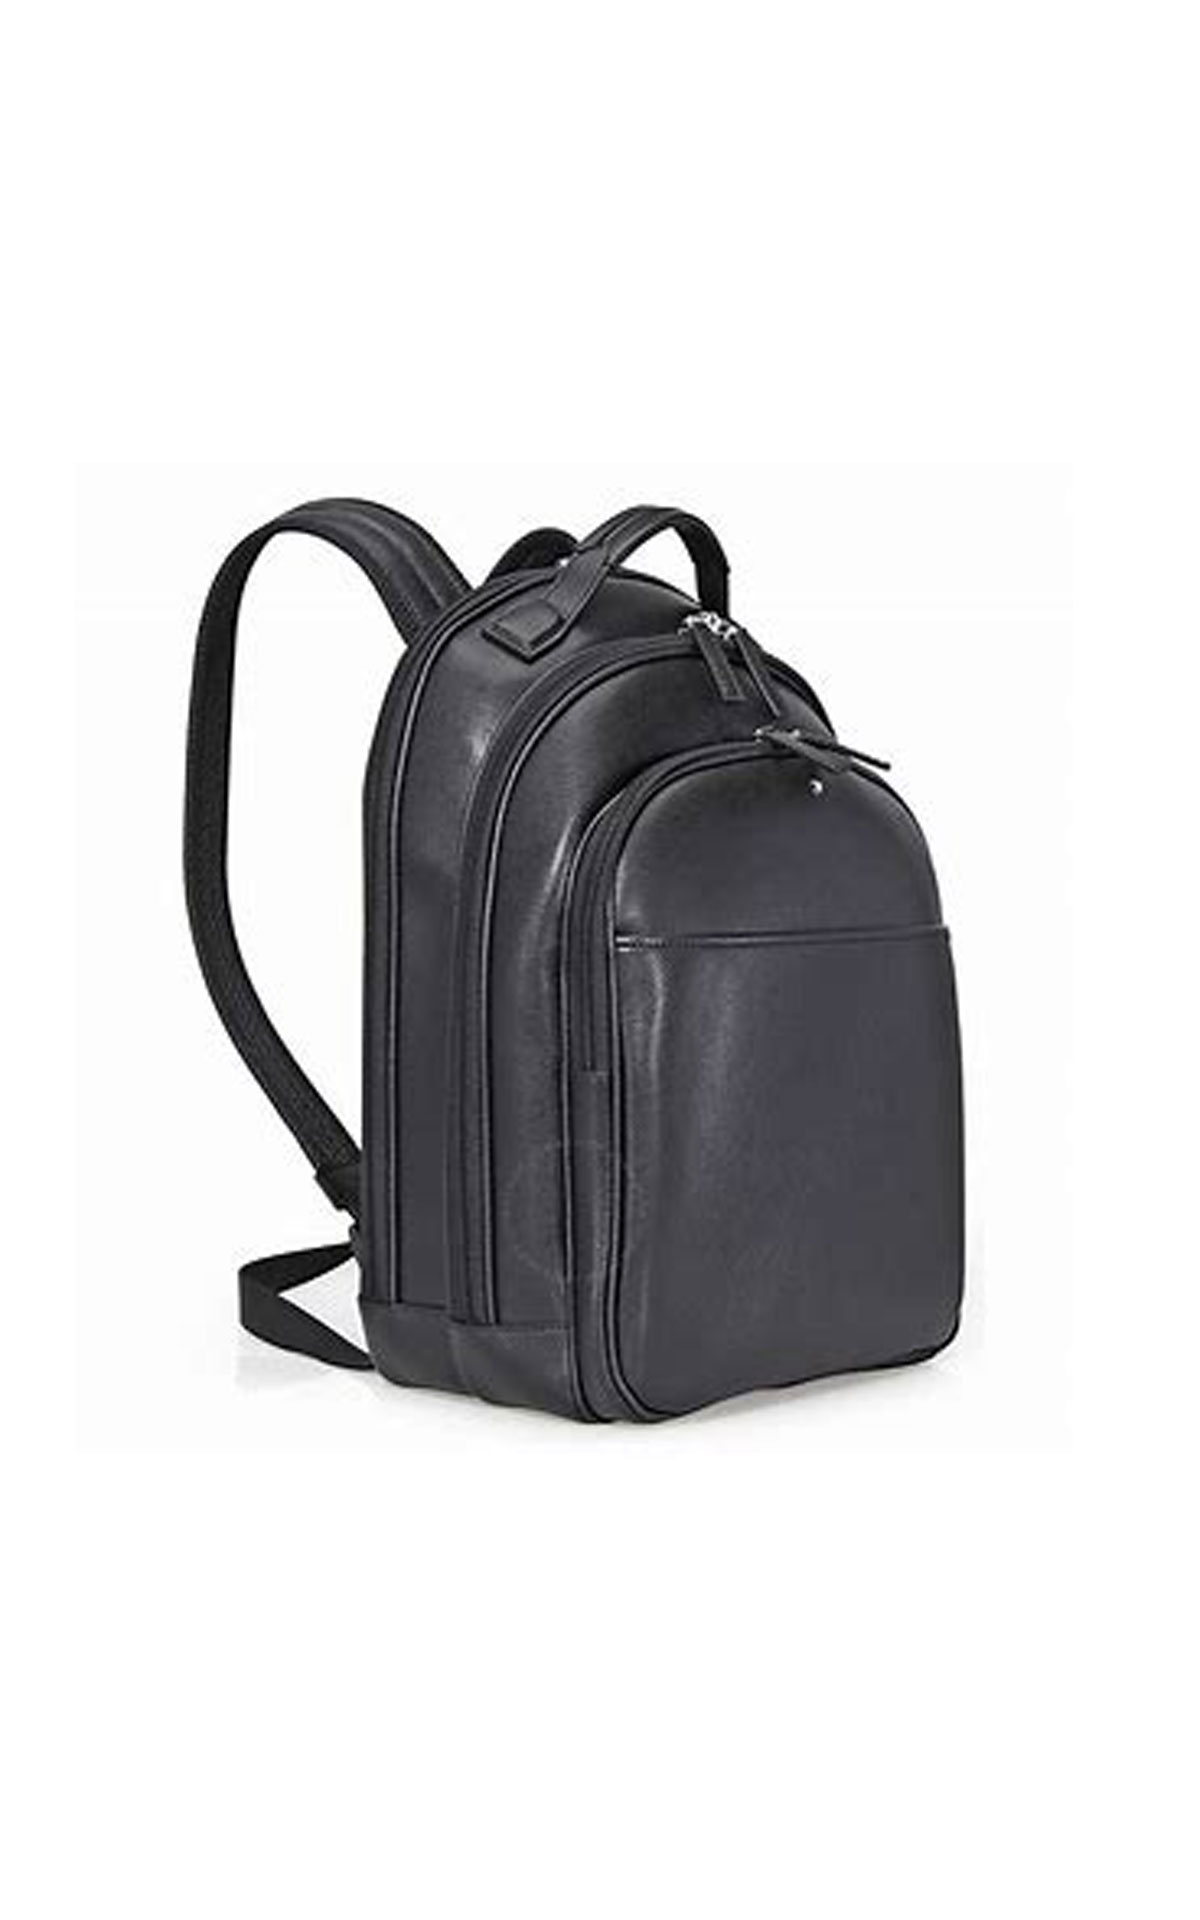 Montblanc Small sartorial backpack black from Bicester Village